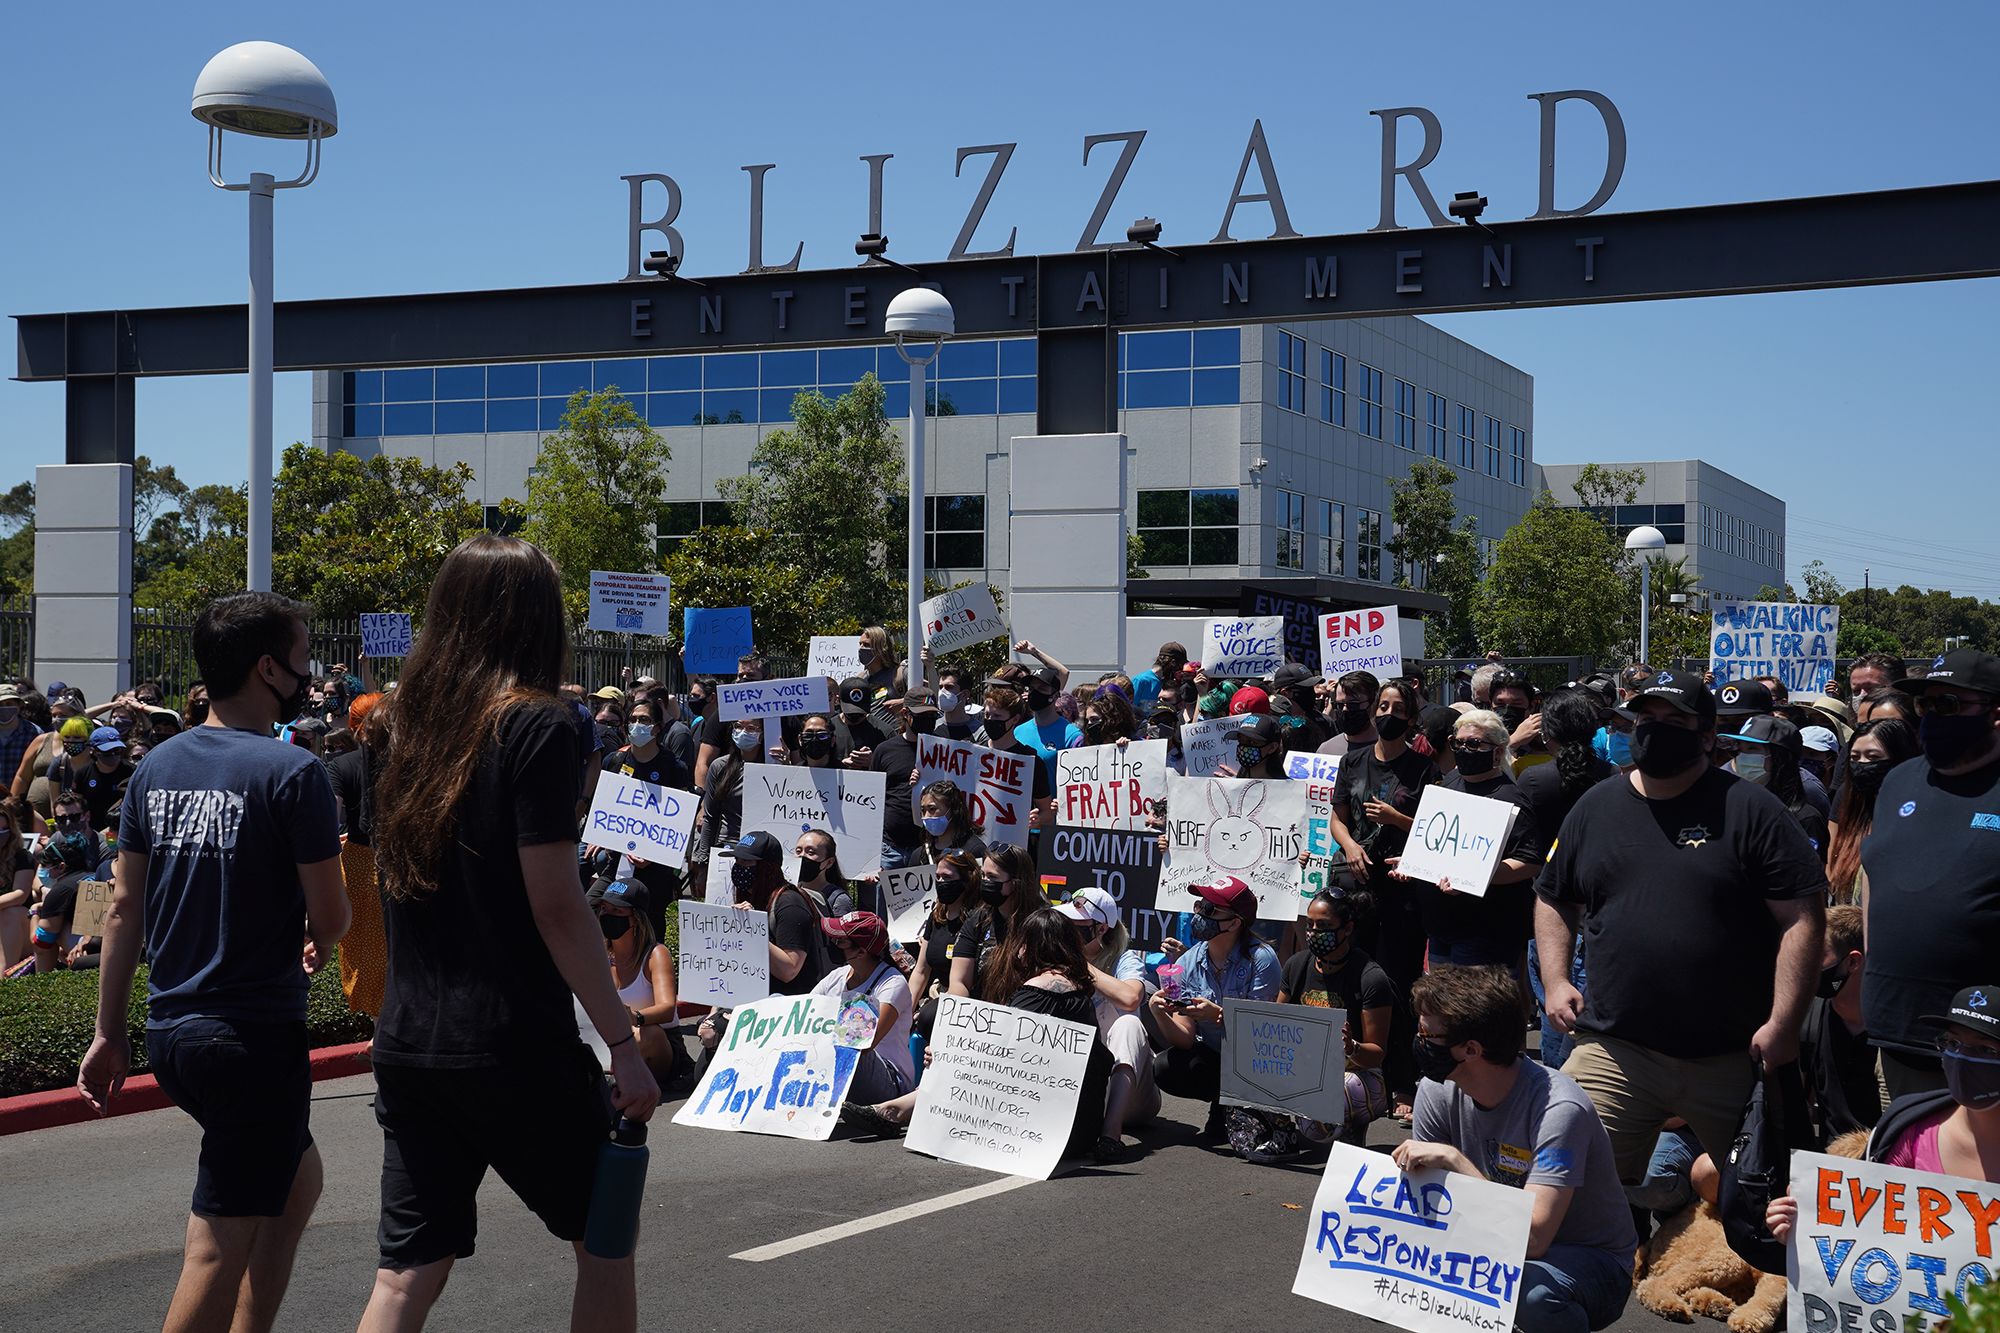 Everything You Need To Know About The Activision Blizzard Scandal